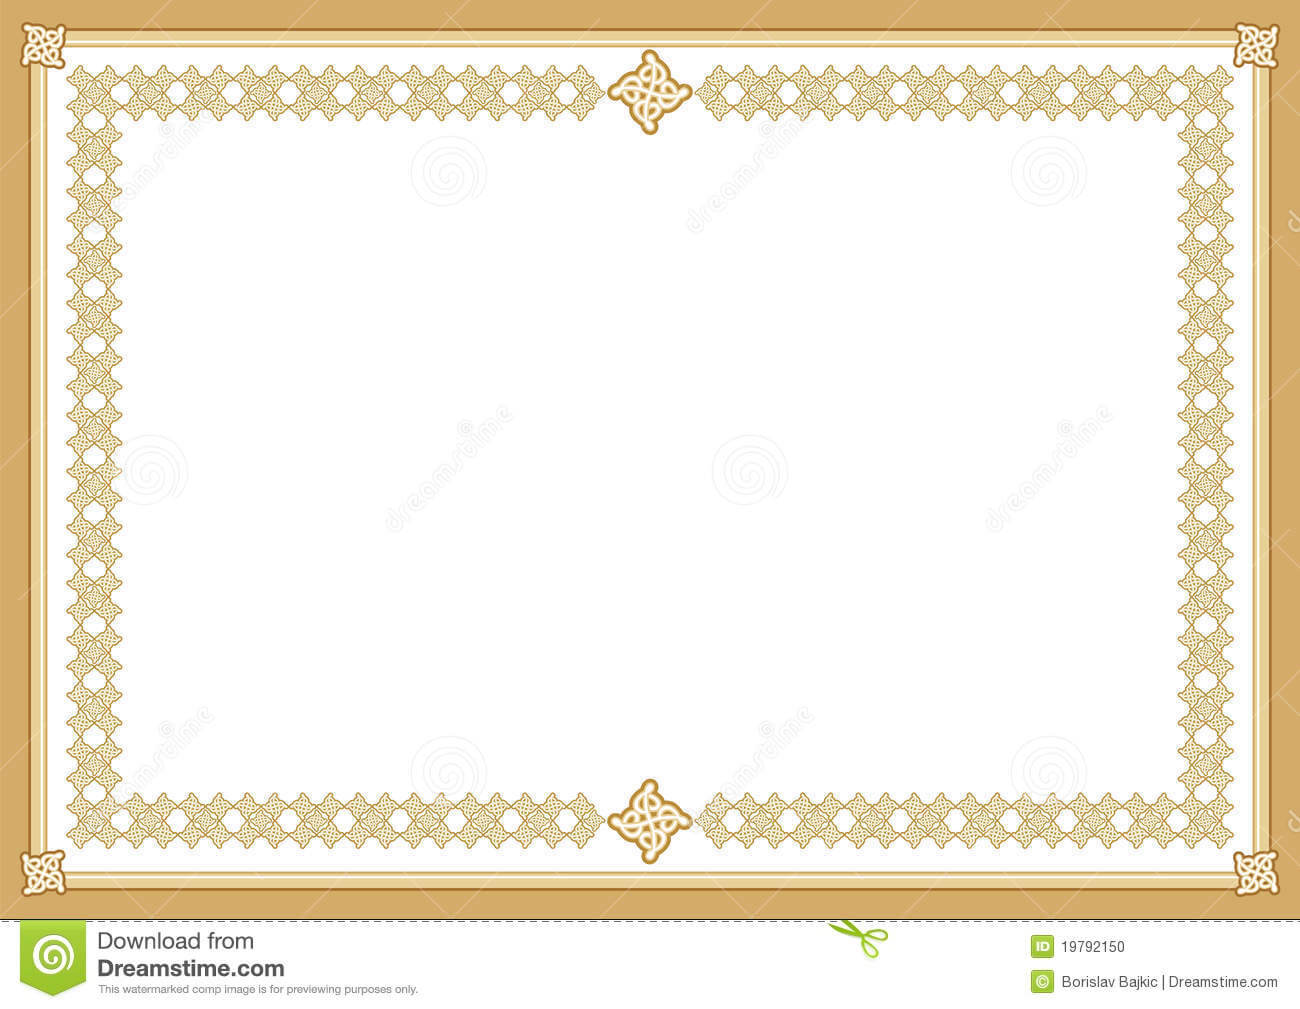 Certificate Stock Vector. Illustration Of Awards, Coloured Throughout Award Certificate Border Template